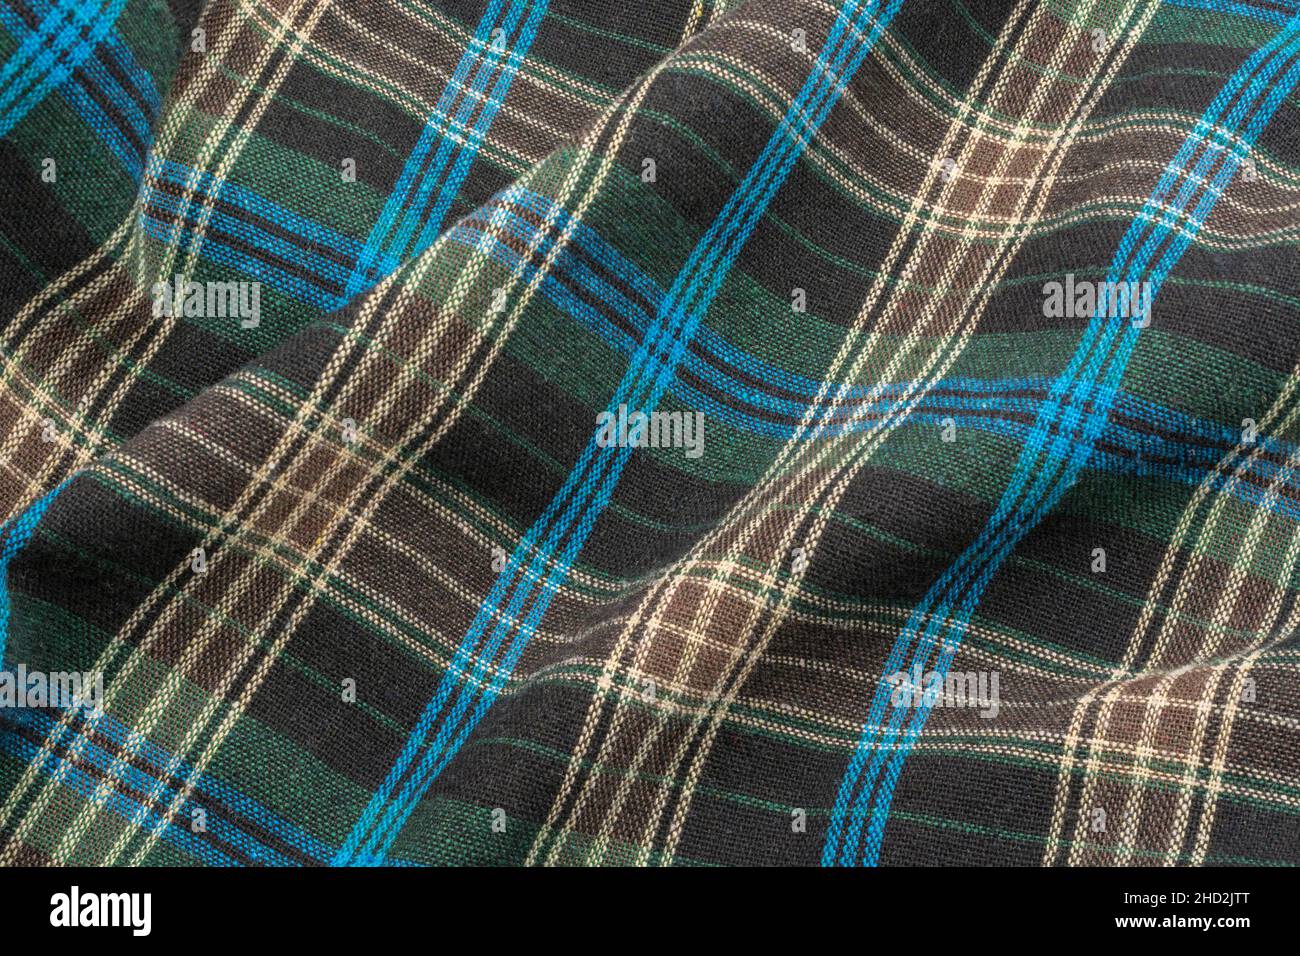 Close-up of blue check flannel fabric, showing warp and weft pattern thread pattern and blue stitching. Stitched line, lines of stitches. Stock Photo